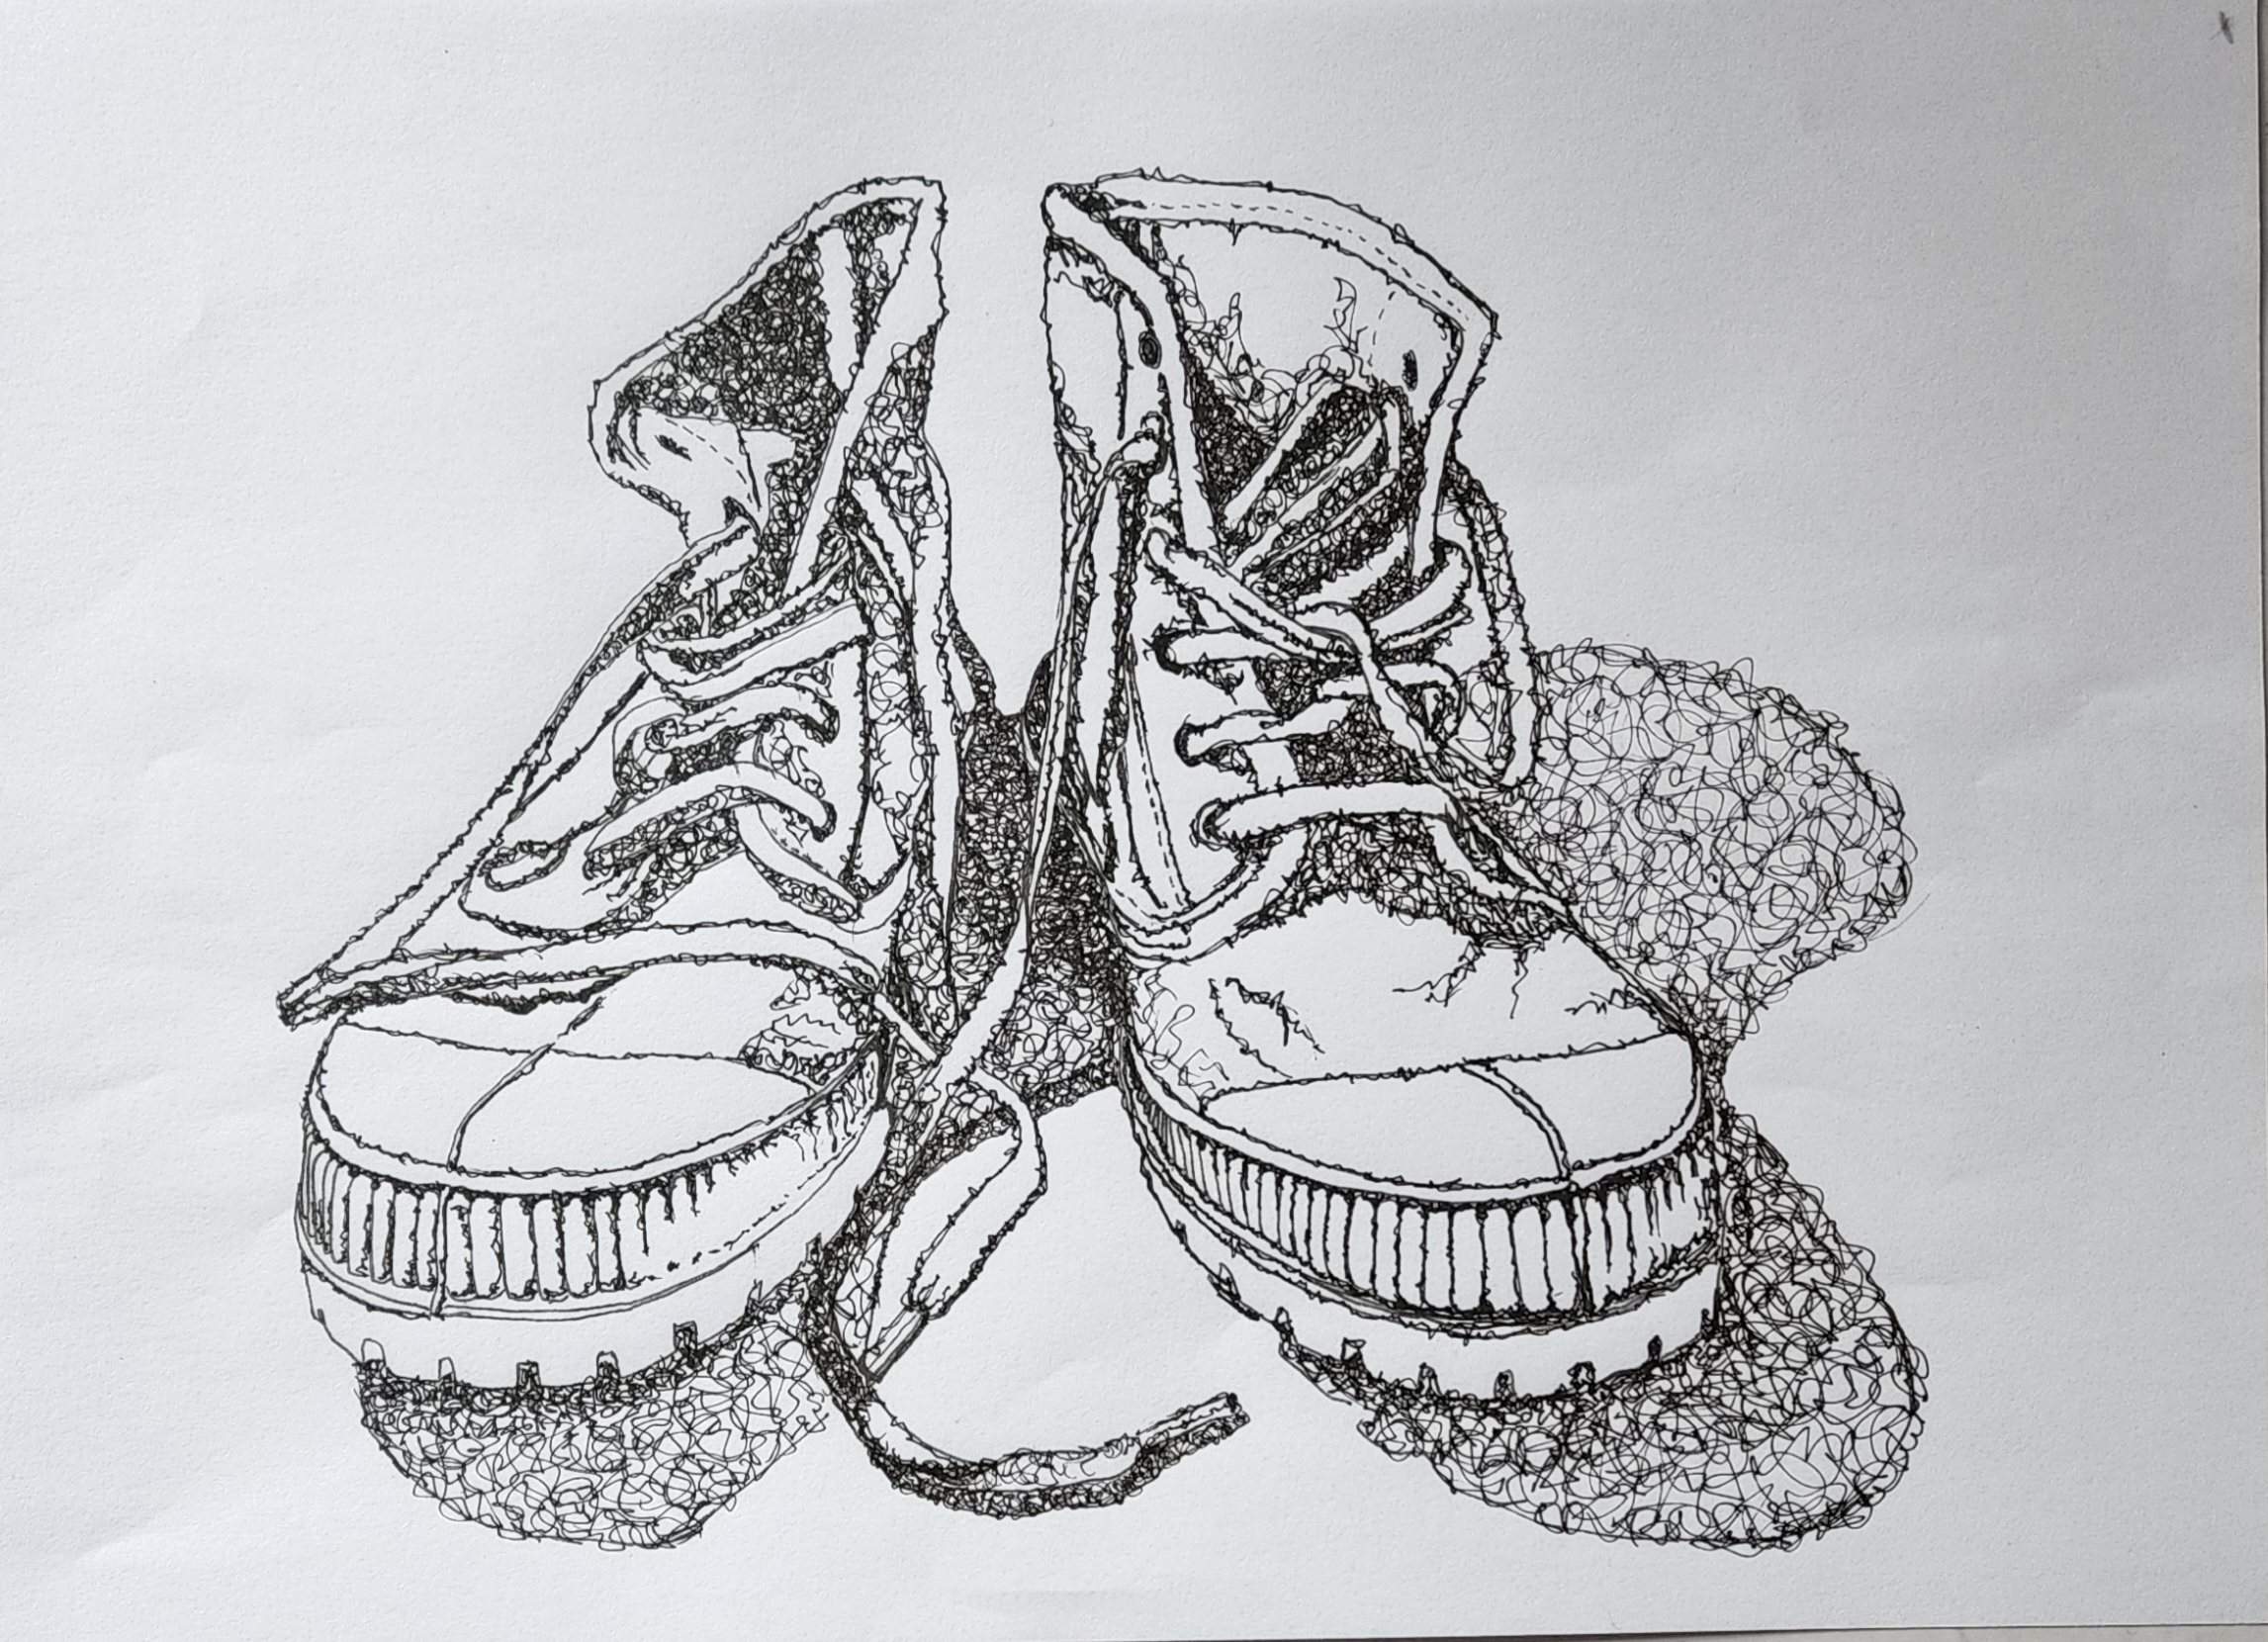 Boots by Dawn Murray as part of her member's Artist Profile